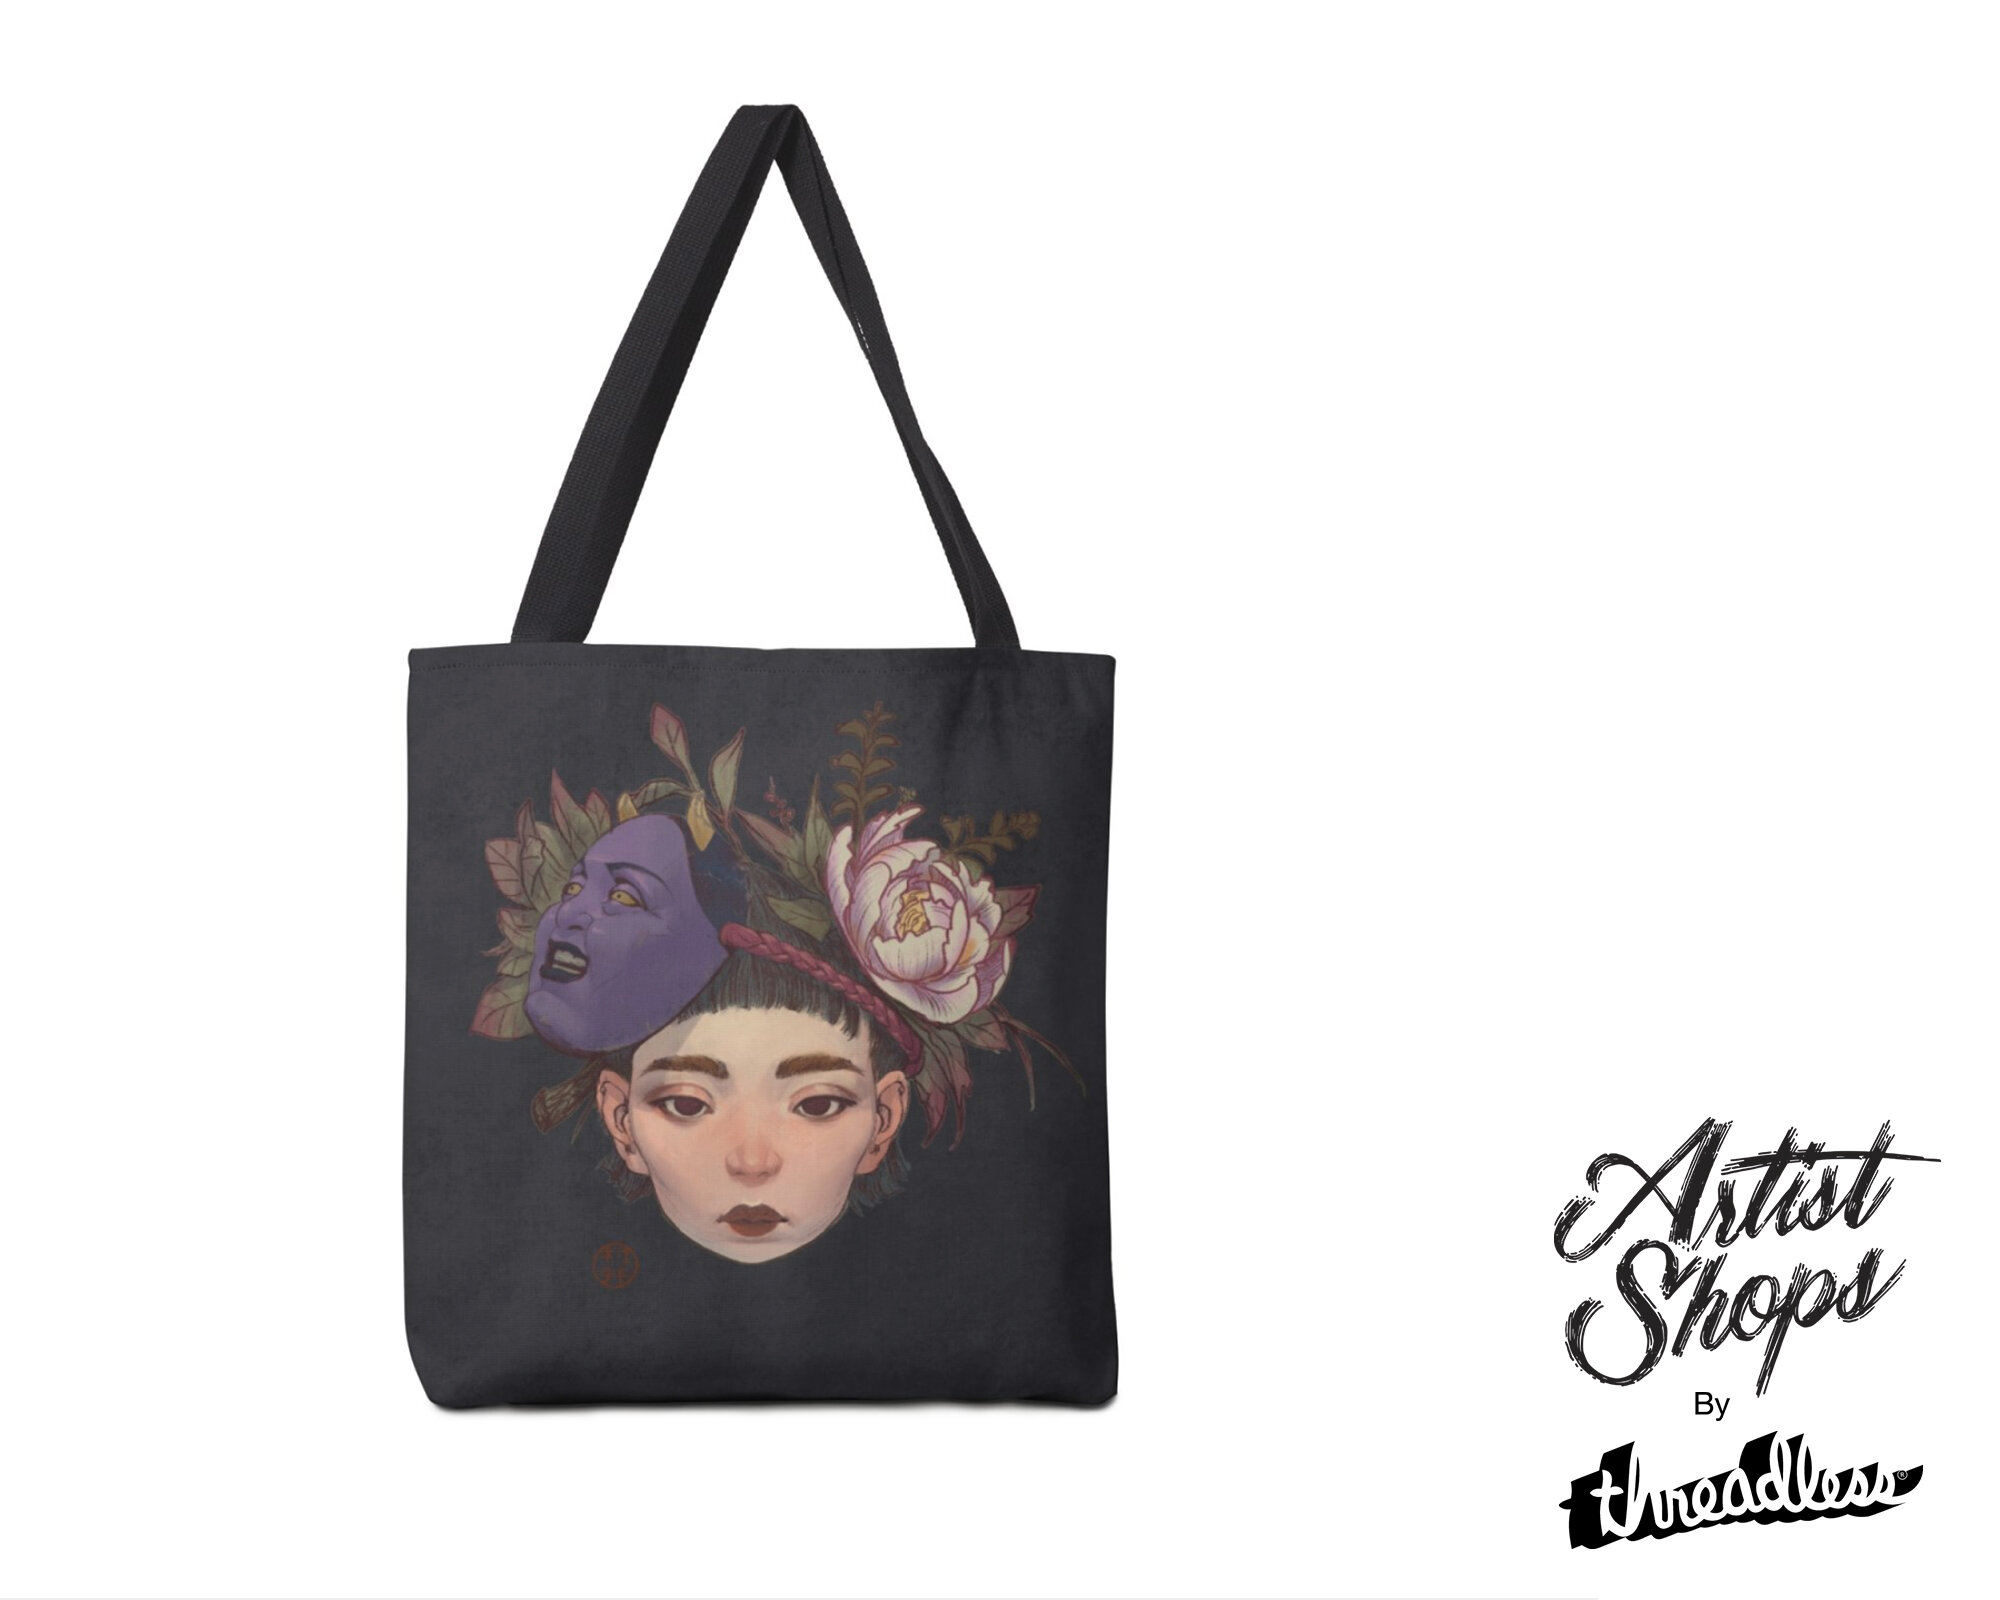 Threadless Totebag | Product Review - YouTube